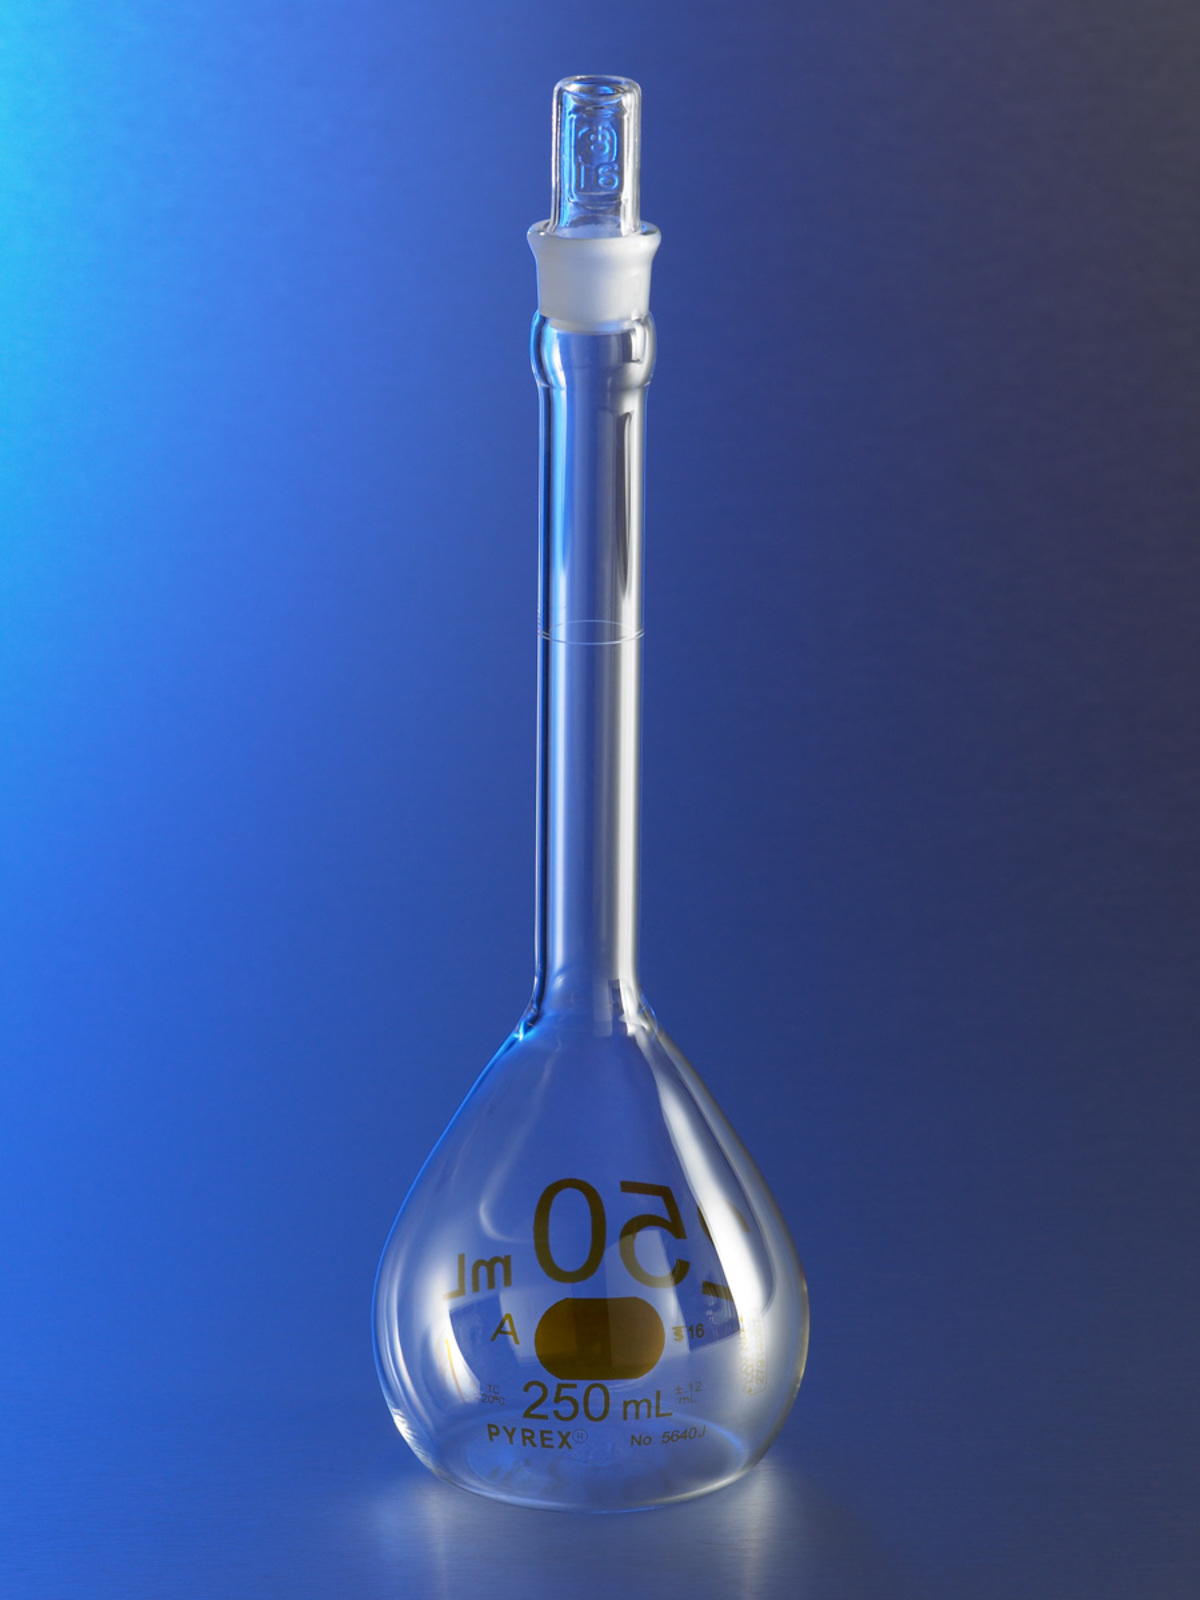 PYREX® Class A Volumetric Flask with Stopper | Corning